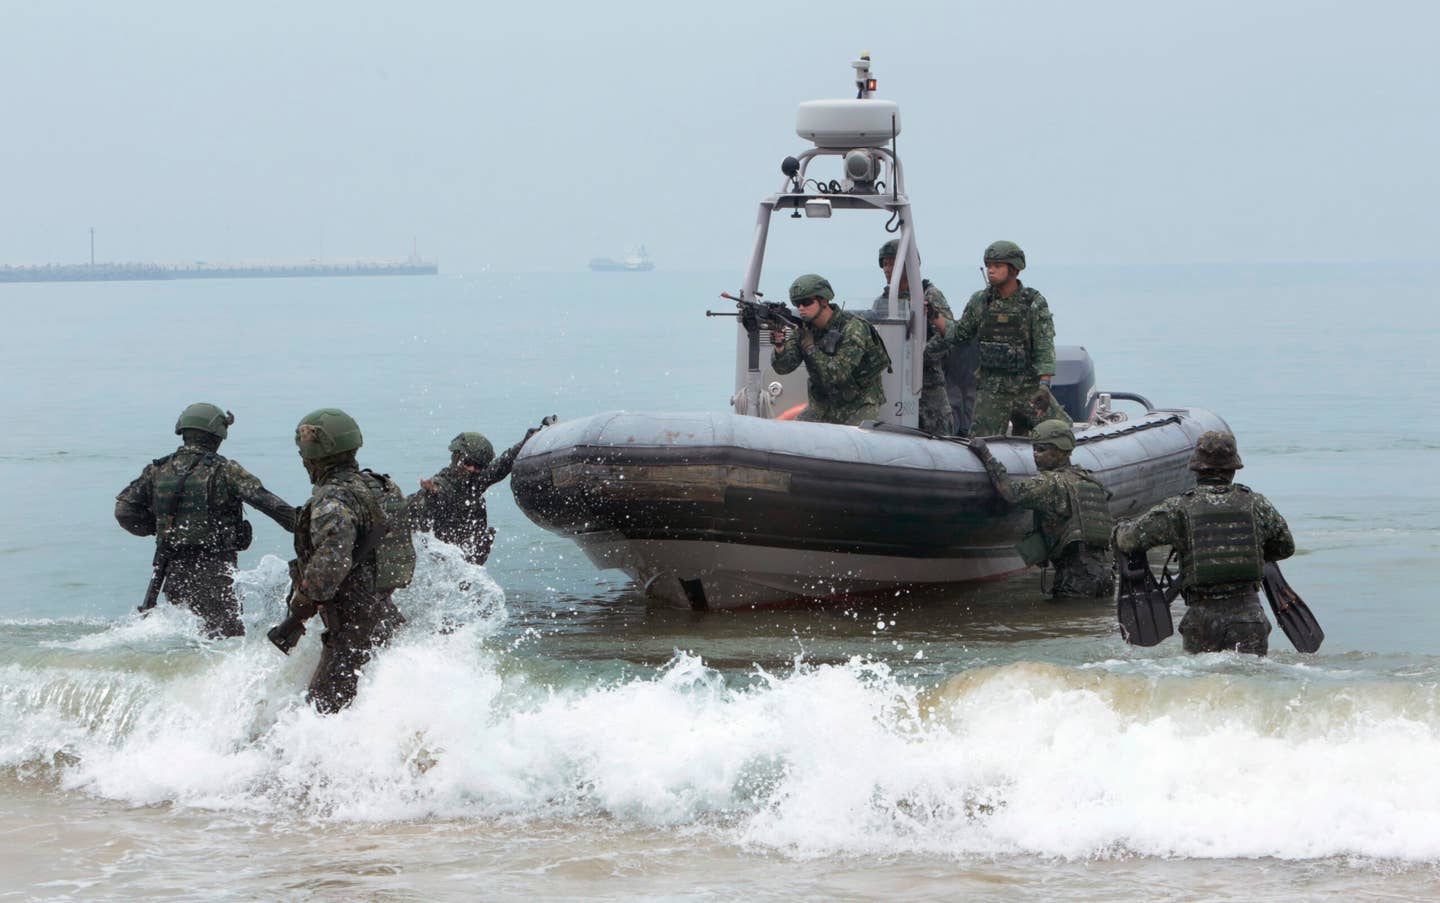 Special forces from the Republic of China Marine Corps during an anti-invasion drill in Kinmen island on May 25, 2019. <em>Photo by Patrick Aventurier/Getty Images</em>